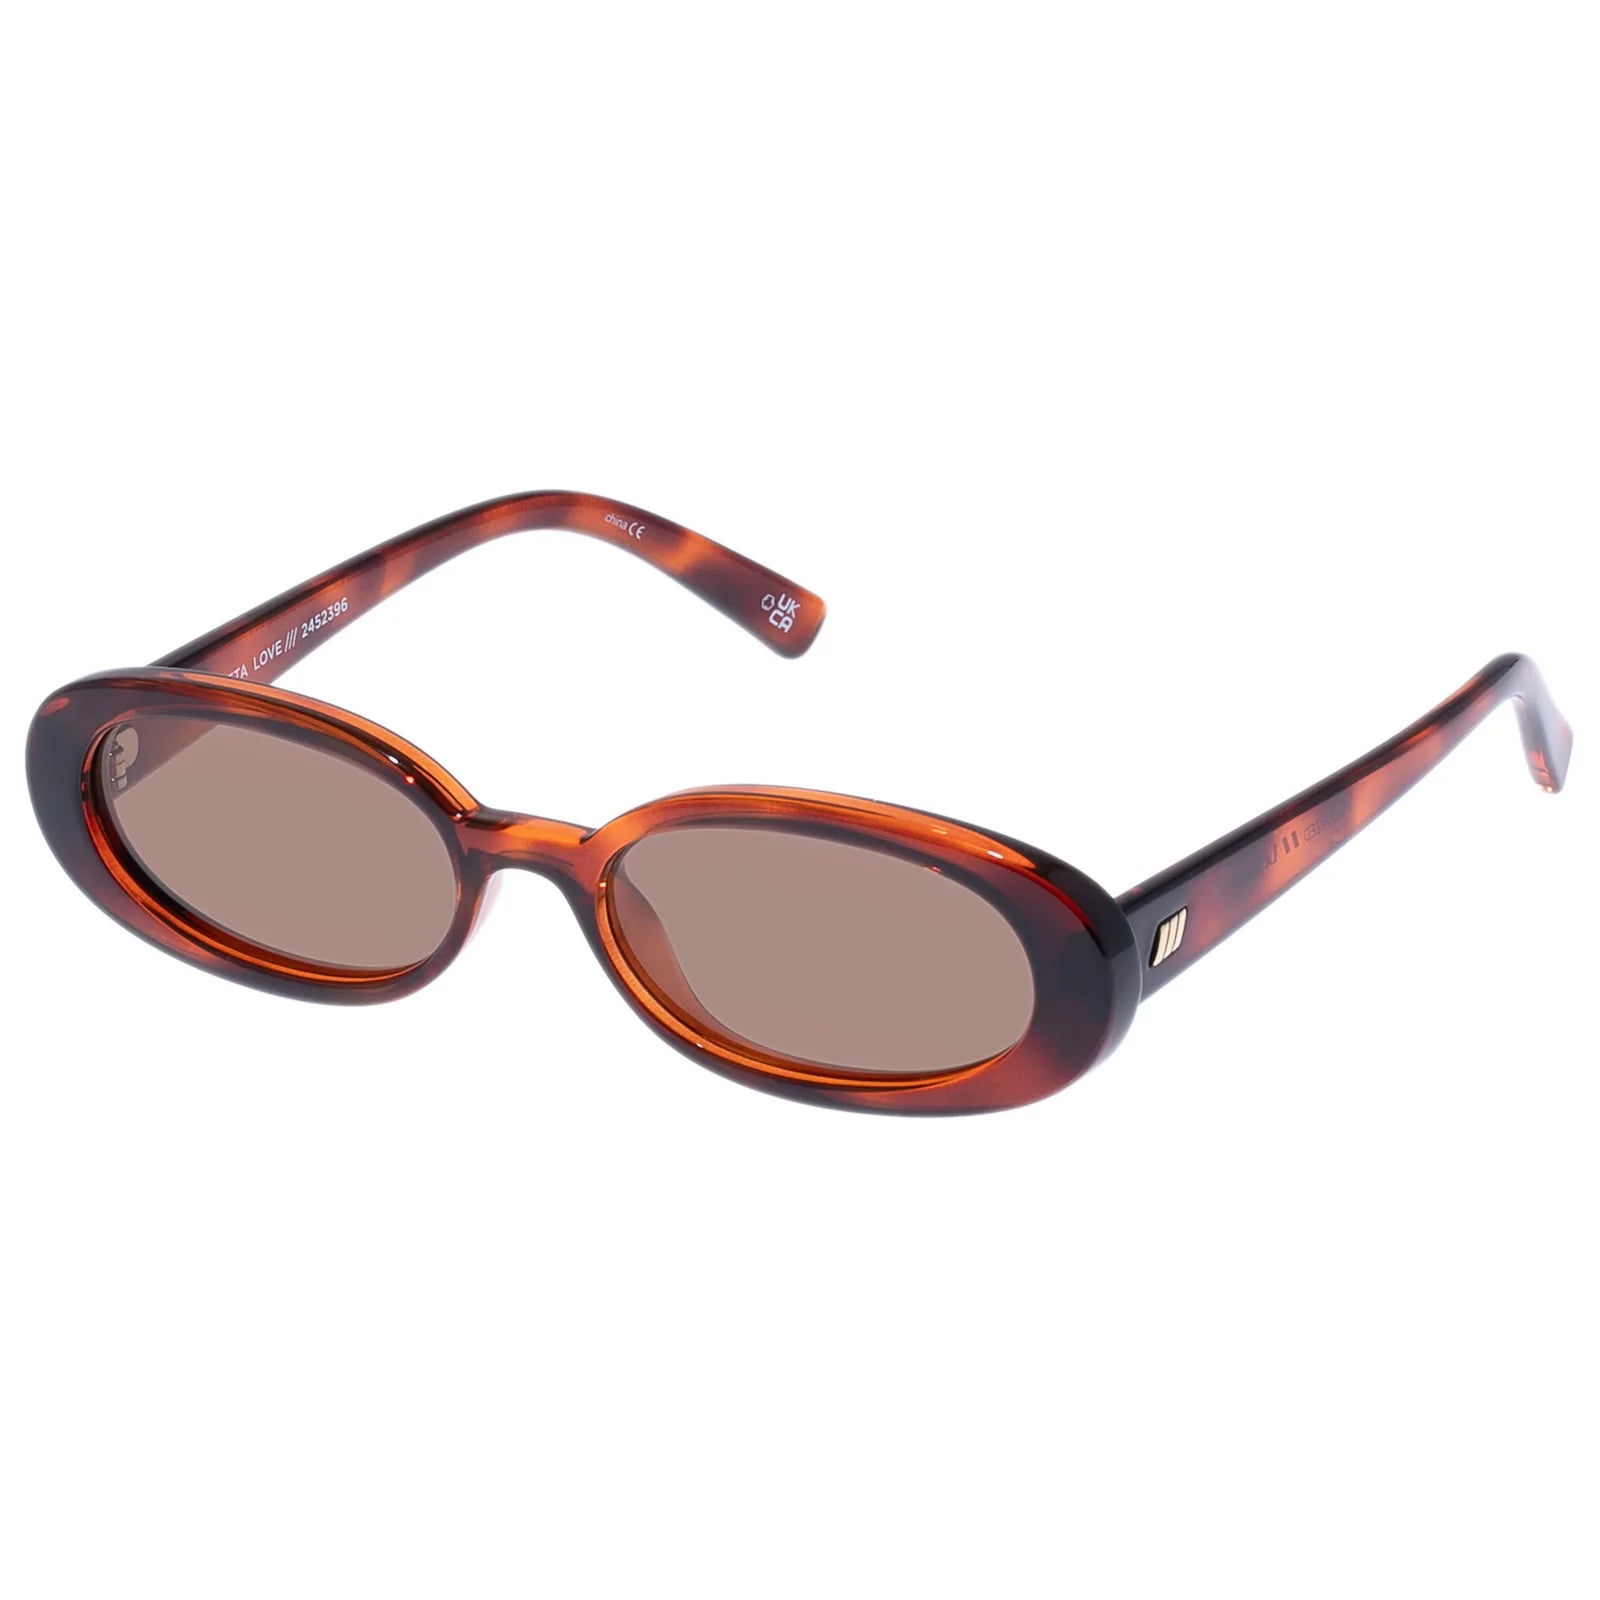 Le Specs Sunglasses - Outta Love - Toffee Tort